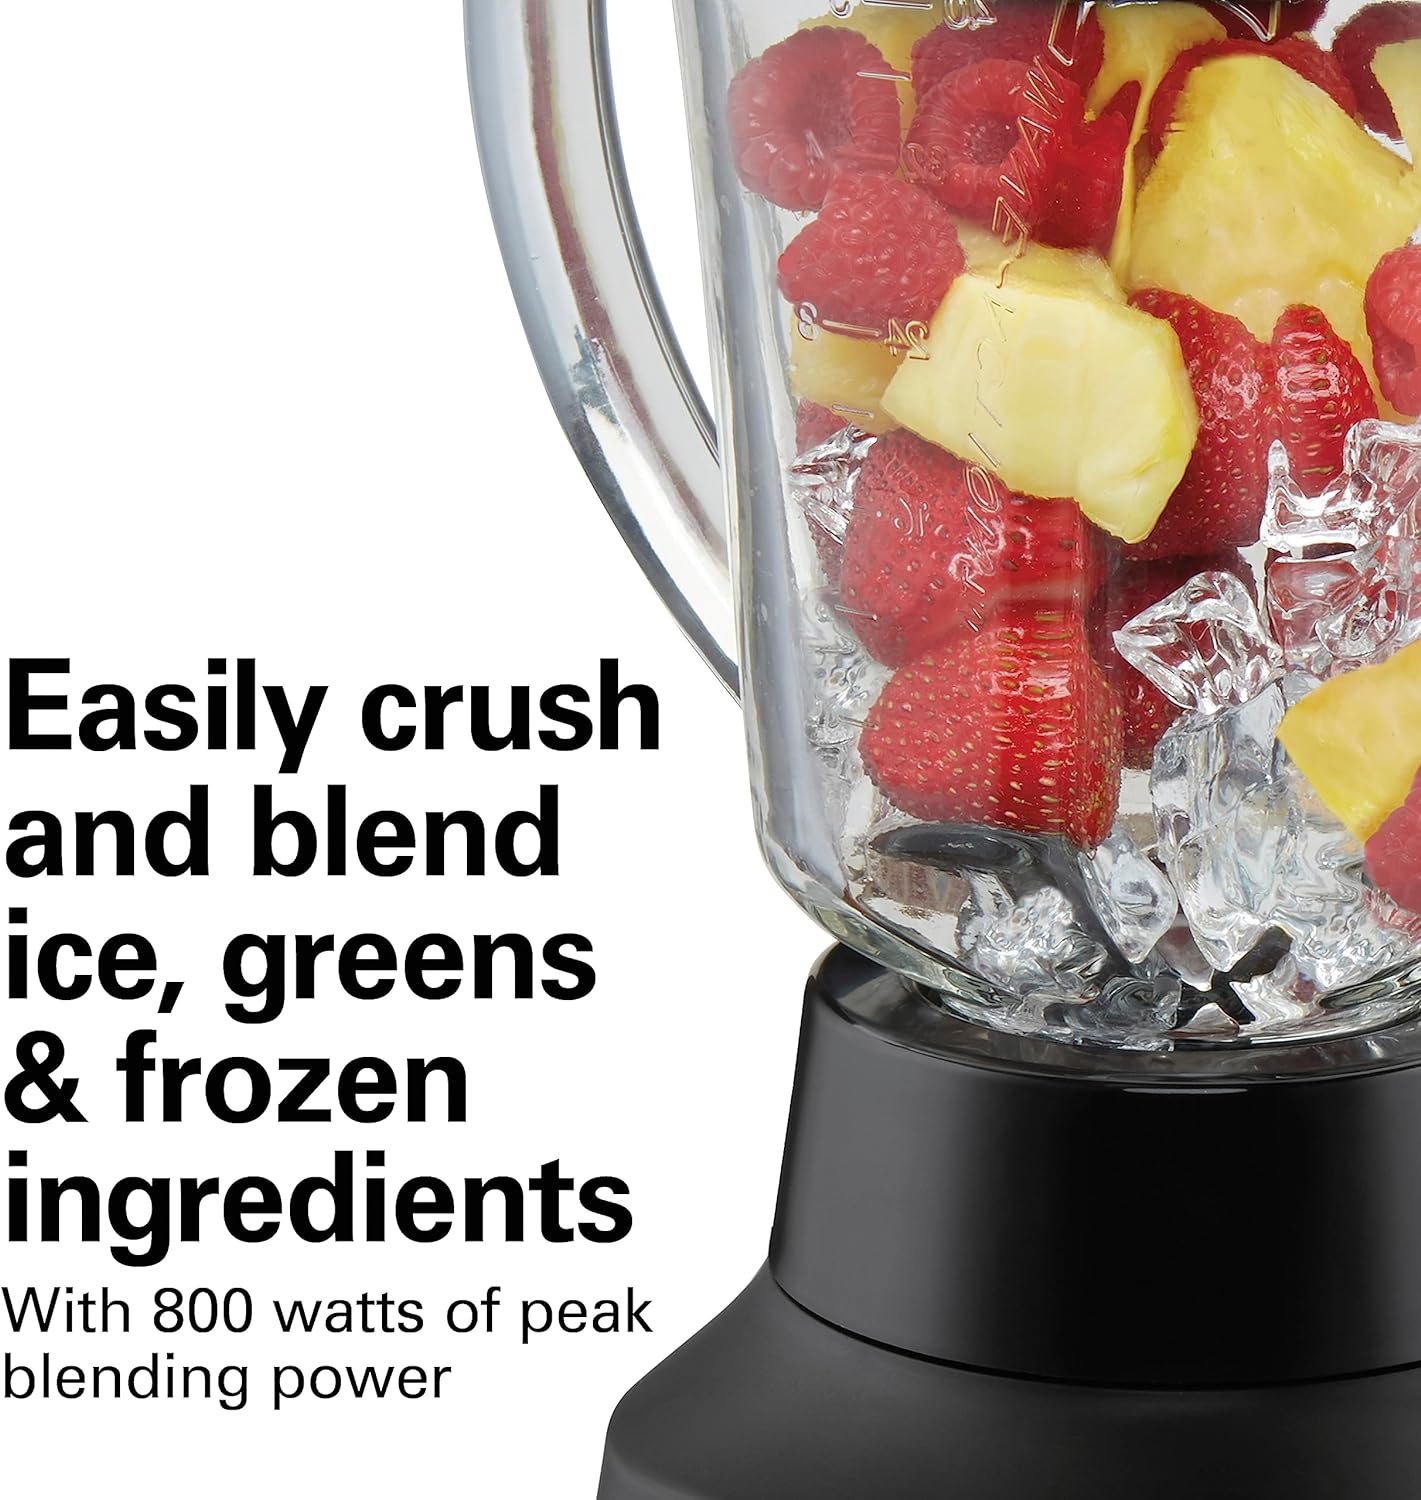 Hamilton Beach 58175 Quiet Blender for Shakes and Smoothies, Puree, Crush Stainless Steel Ice Sabre Blades, 800 Watts, Shatter-Resistant 40oz Glass Jar, Black